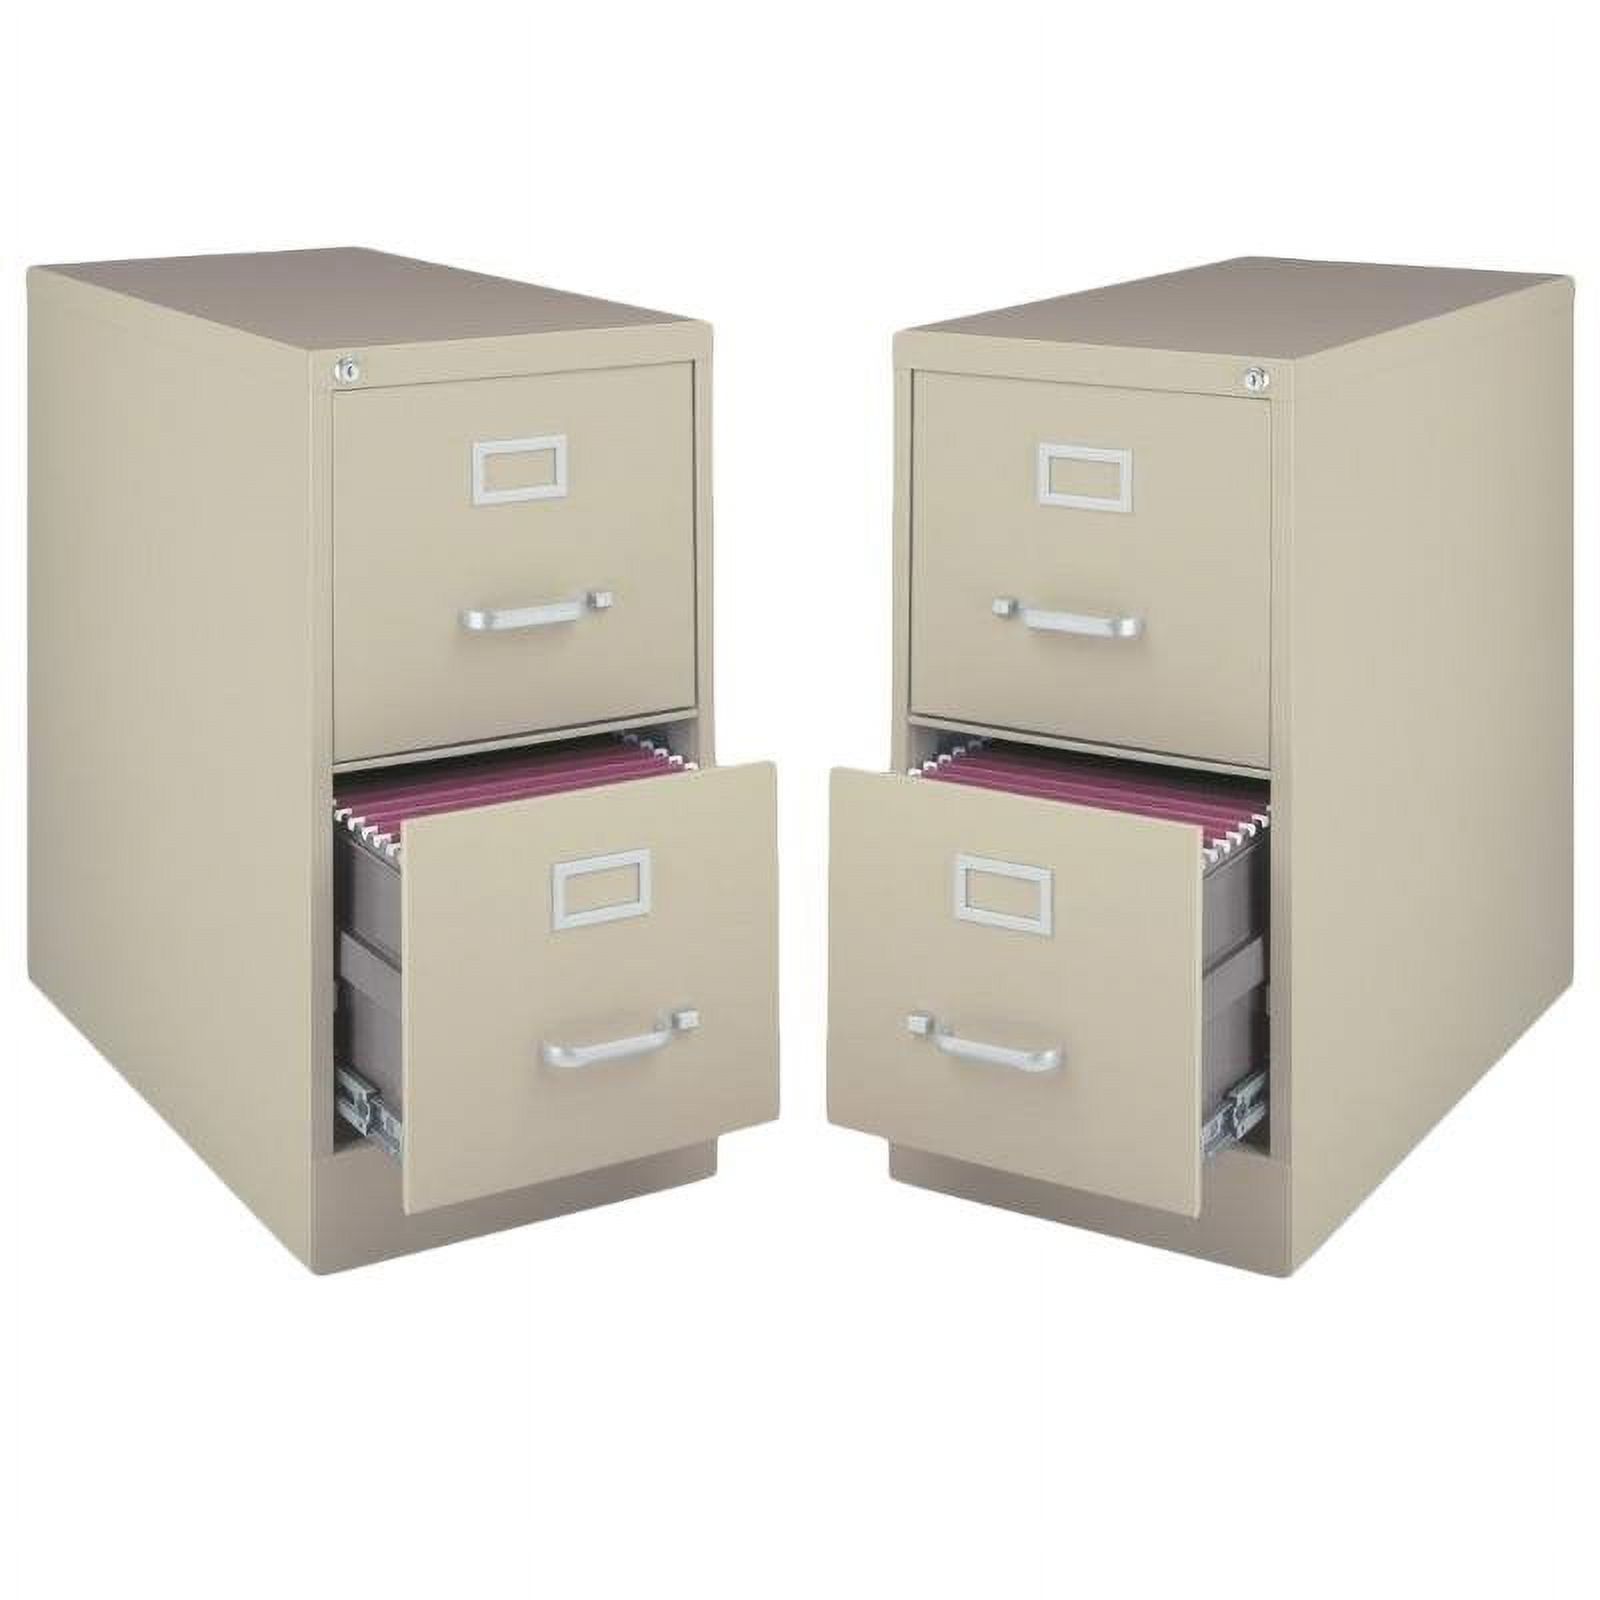 Value Pack (Set of 2) 2 Drawer Vertical Letter File Cabinet in Putty - image 1 of 3